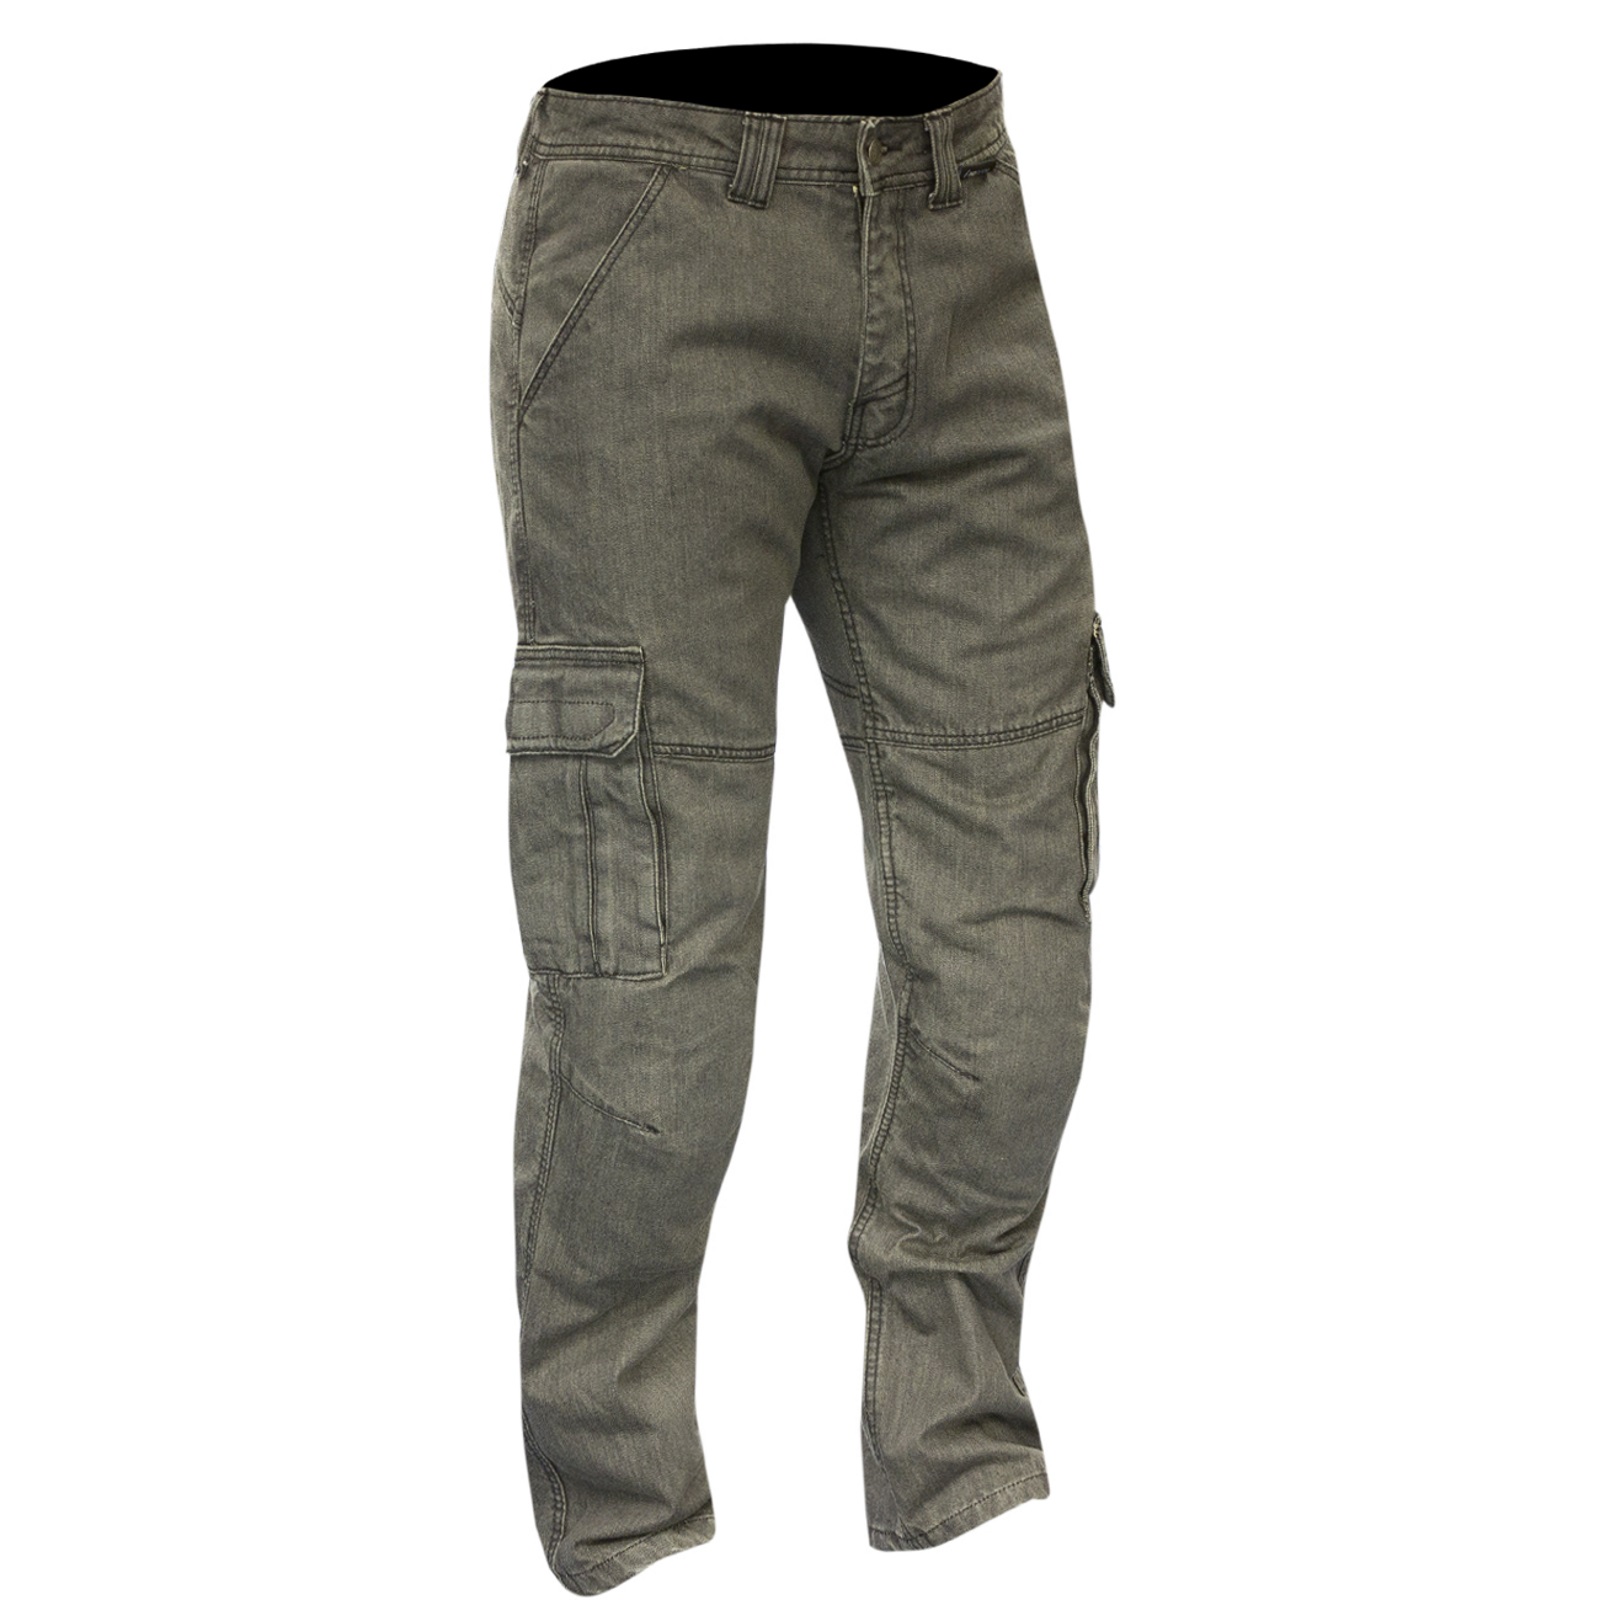 Buy Stylish Black Baggy Cargo Pants Mens at Great Price Online